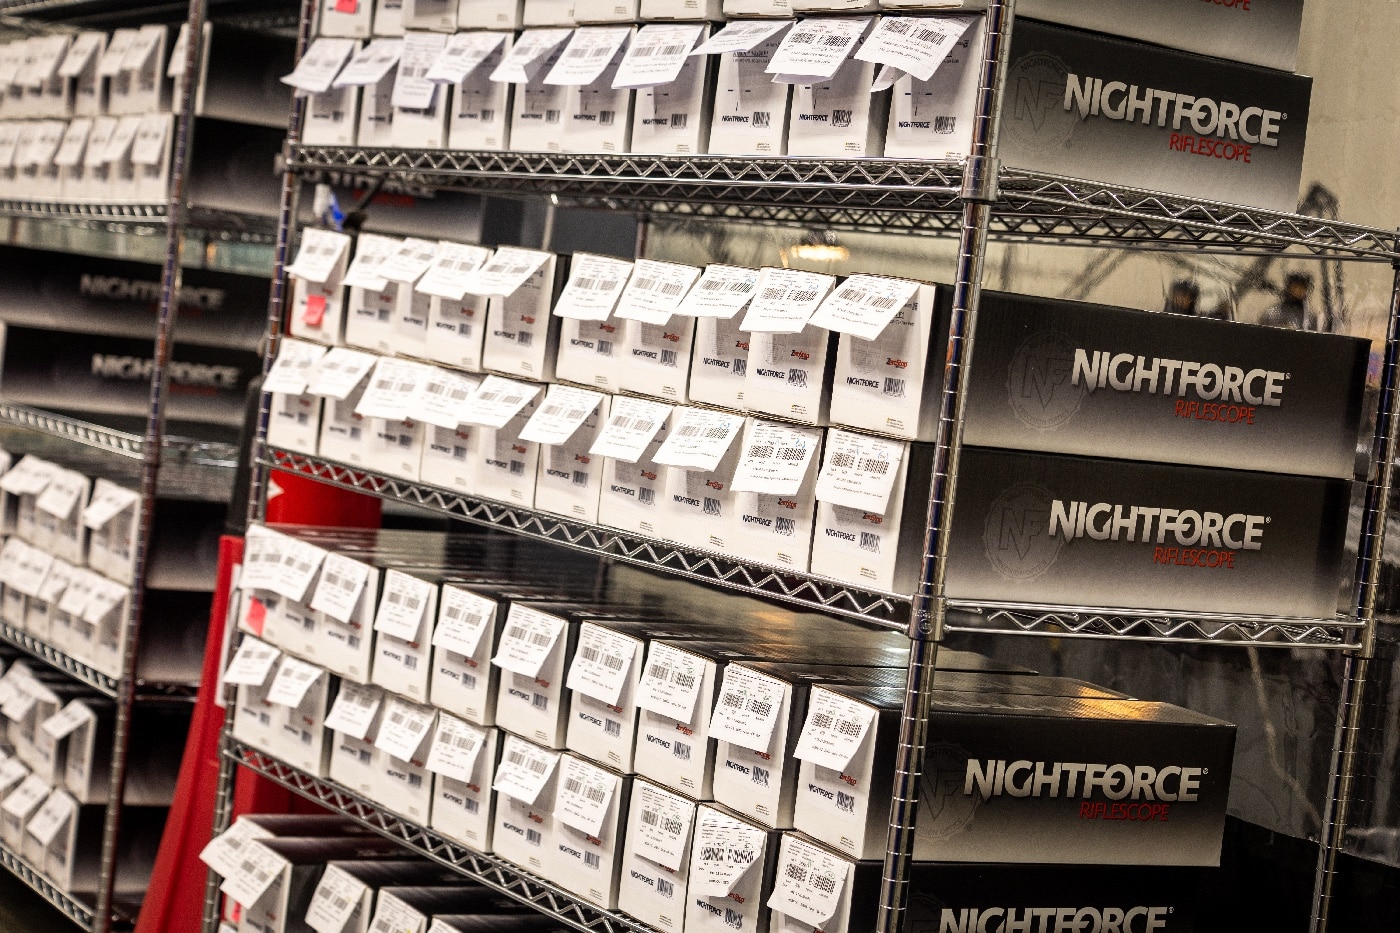 In this digital image, we see many shelves of Nightforce scopes ready for shipping.